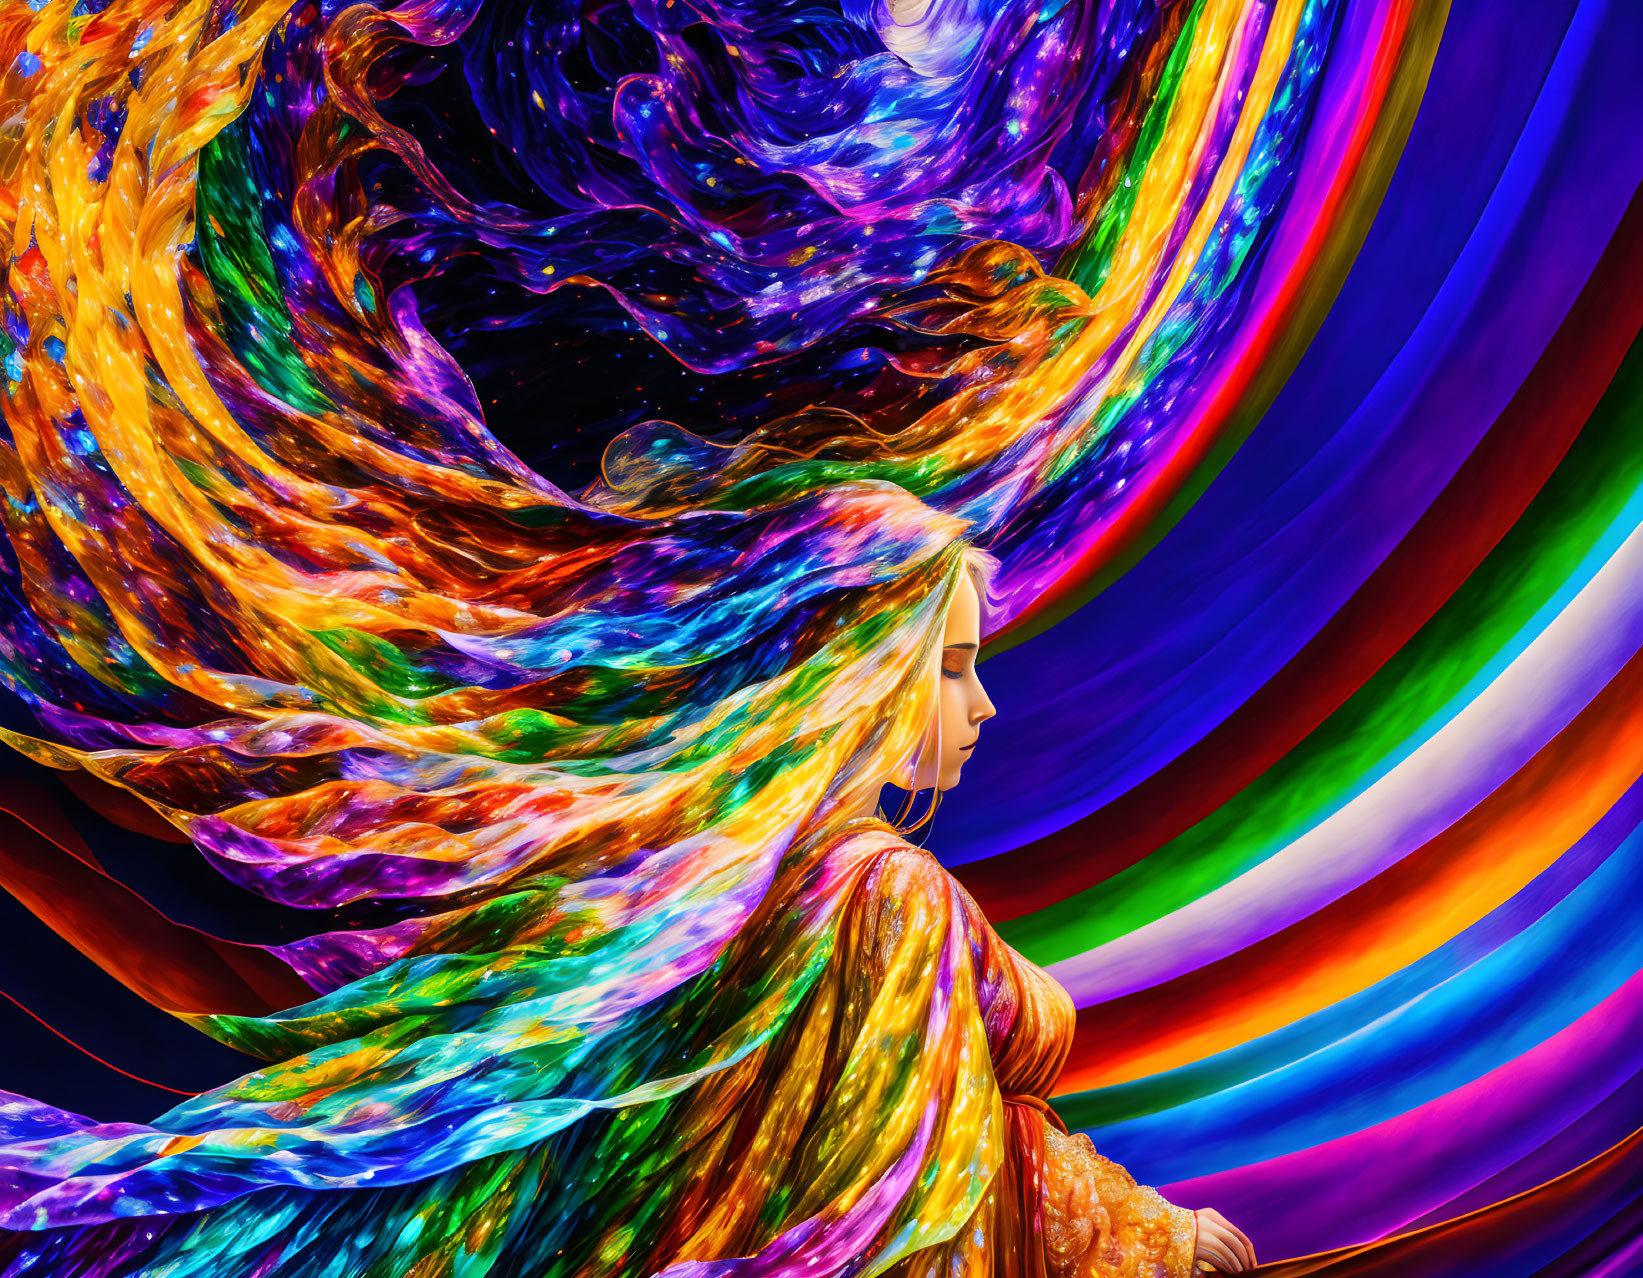 In the colorful flow